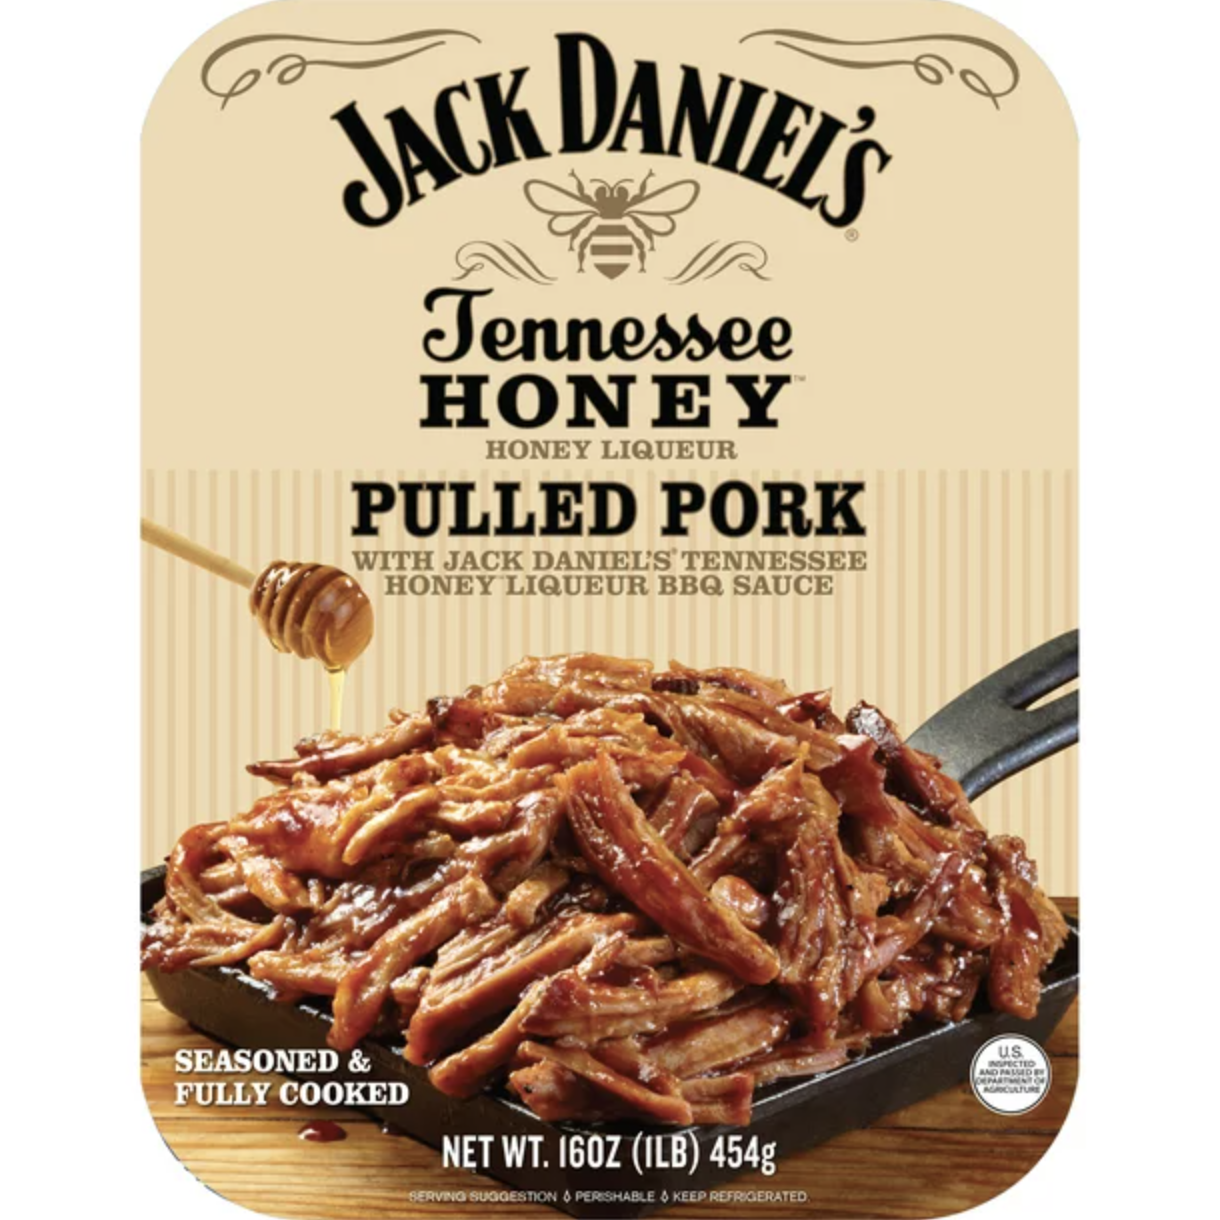 Pulled pork with honey liqueur BBQ sauce